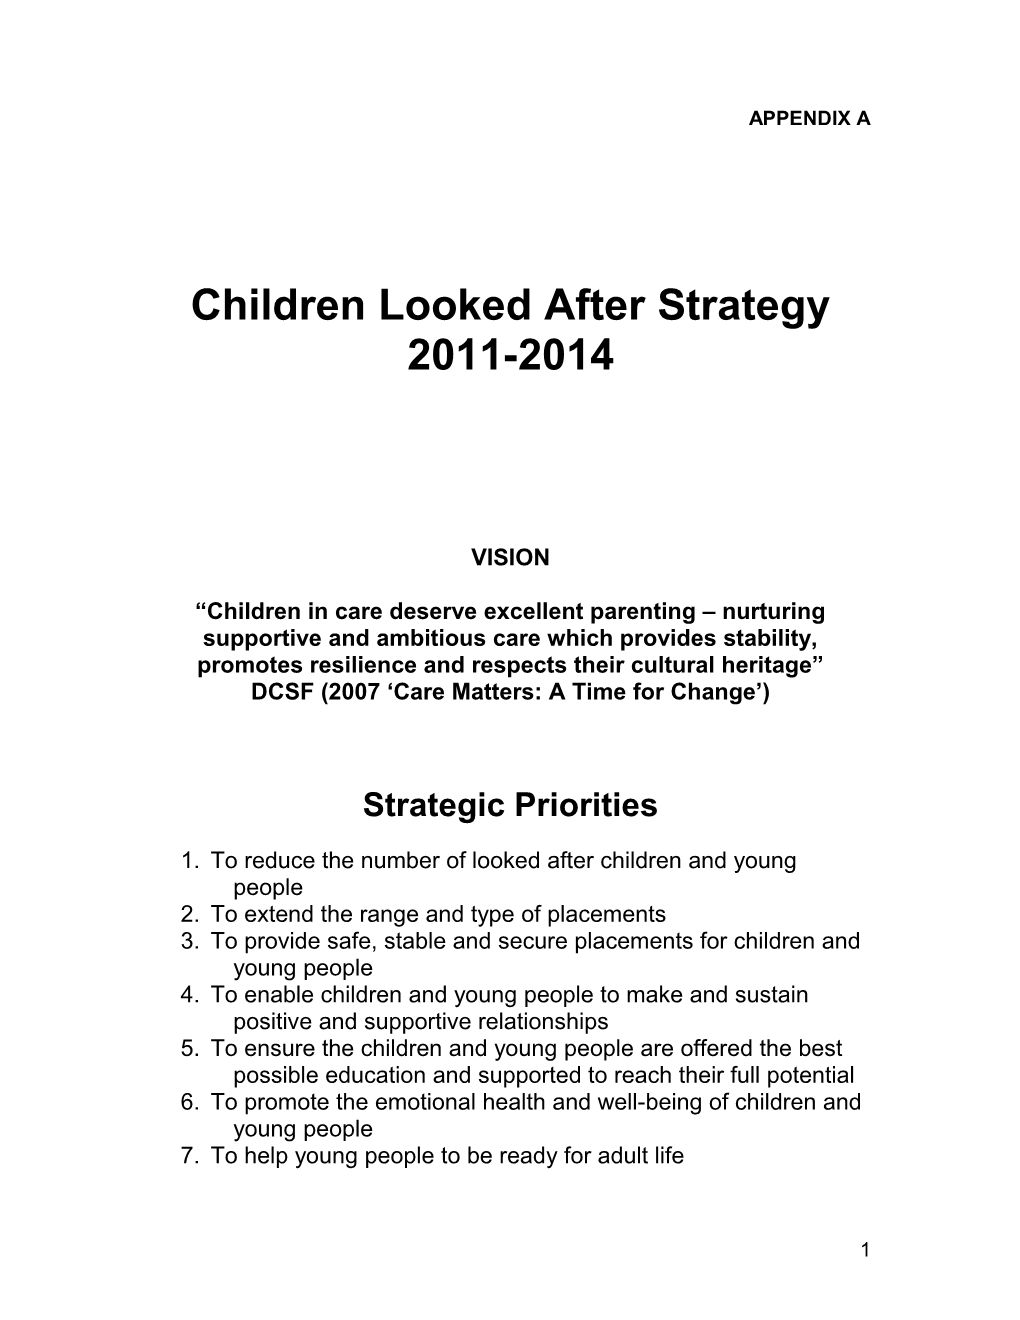 Children Looked After Strategy